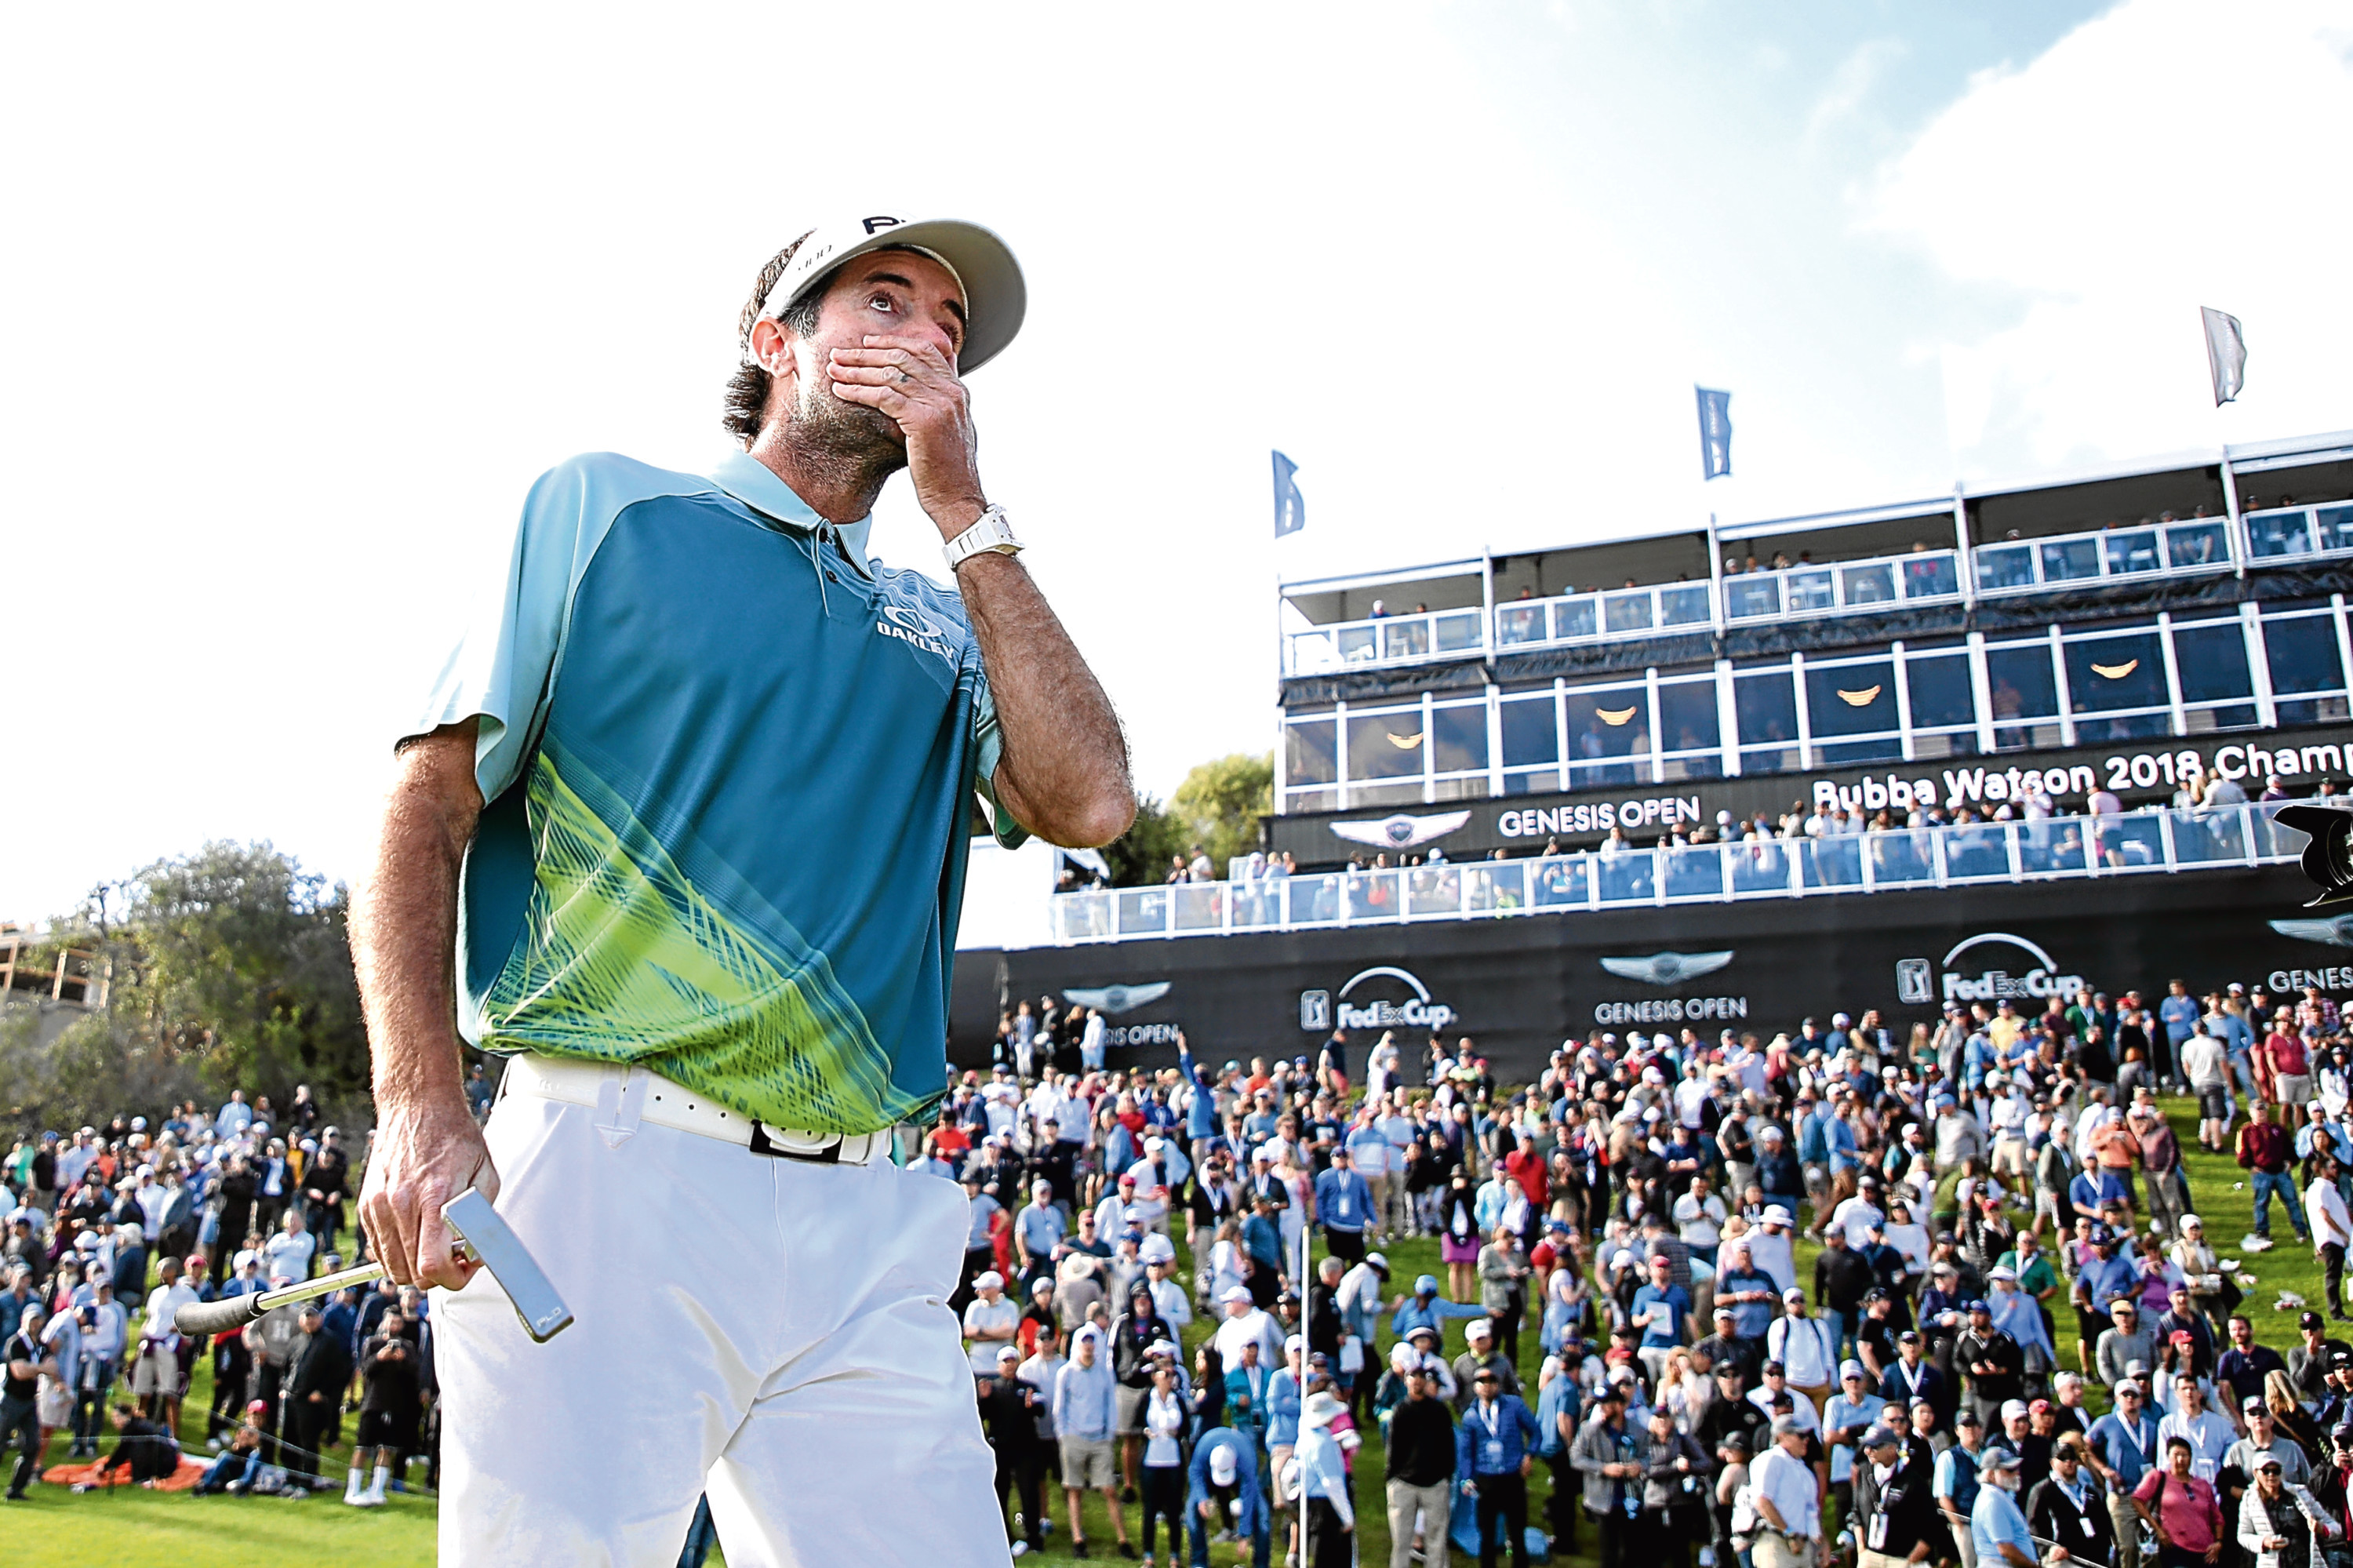 Bubba Watson is speechless at winning the Genesis Open, not about the ludicrous pace of play of his rivals.